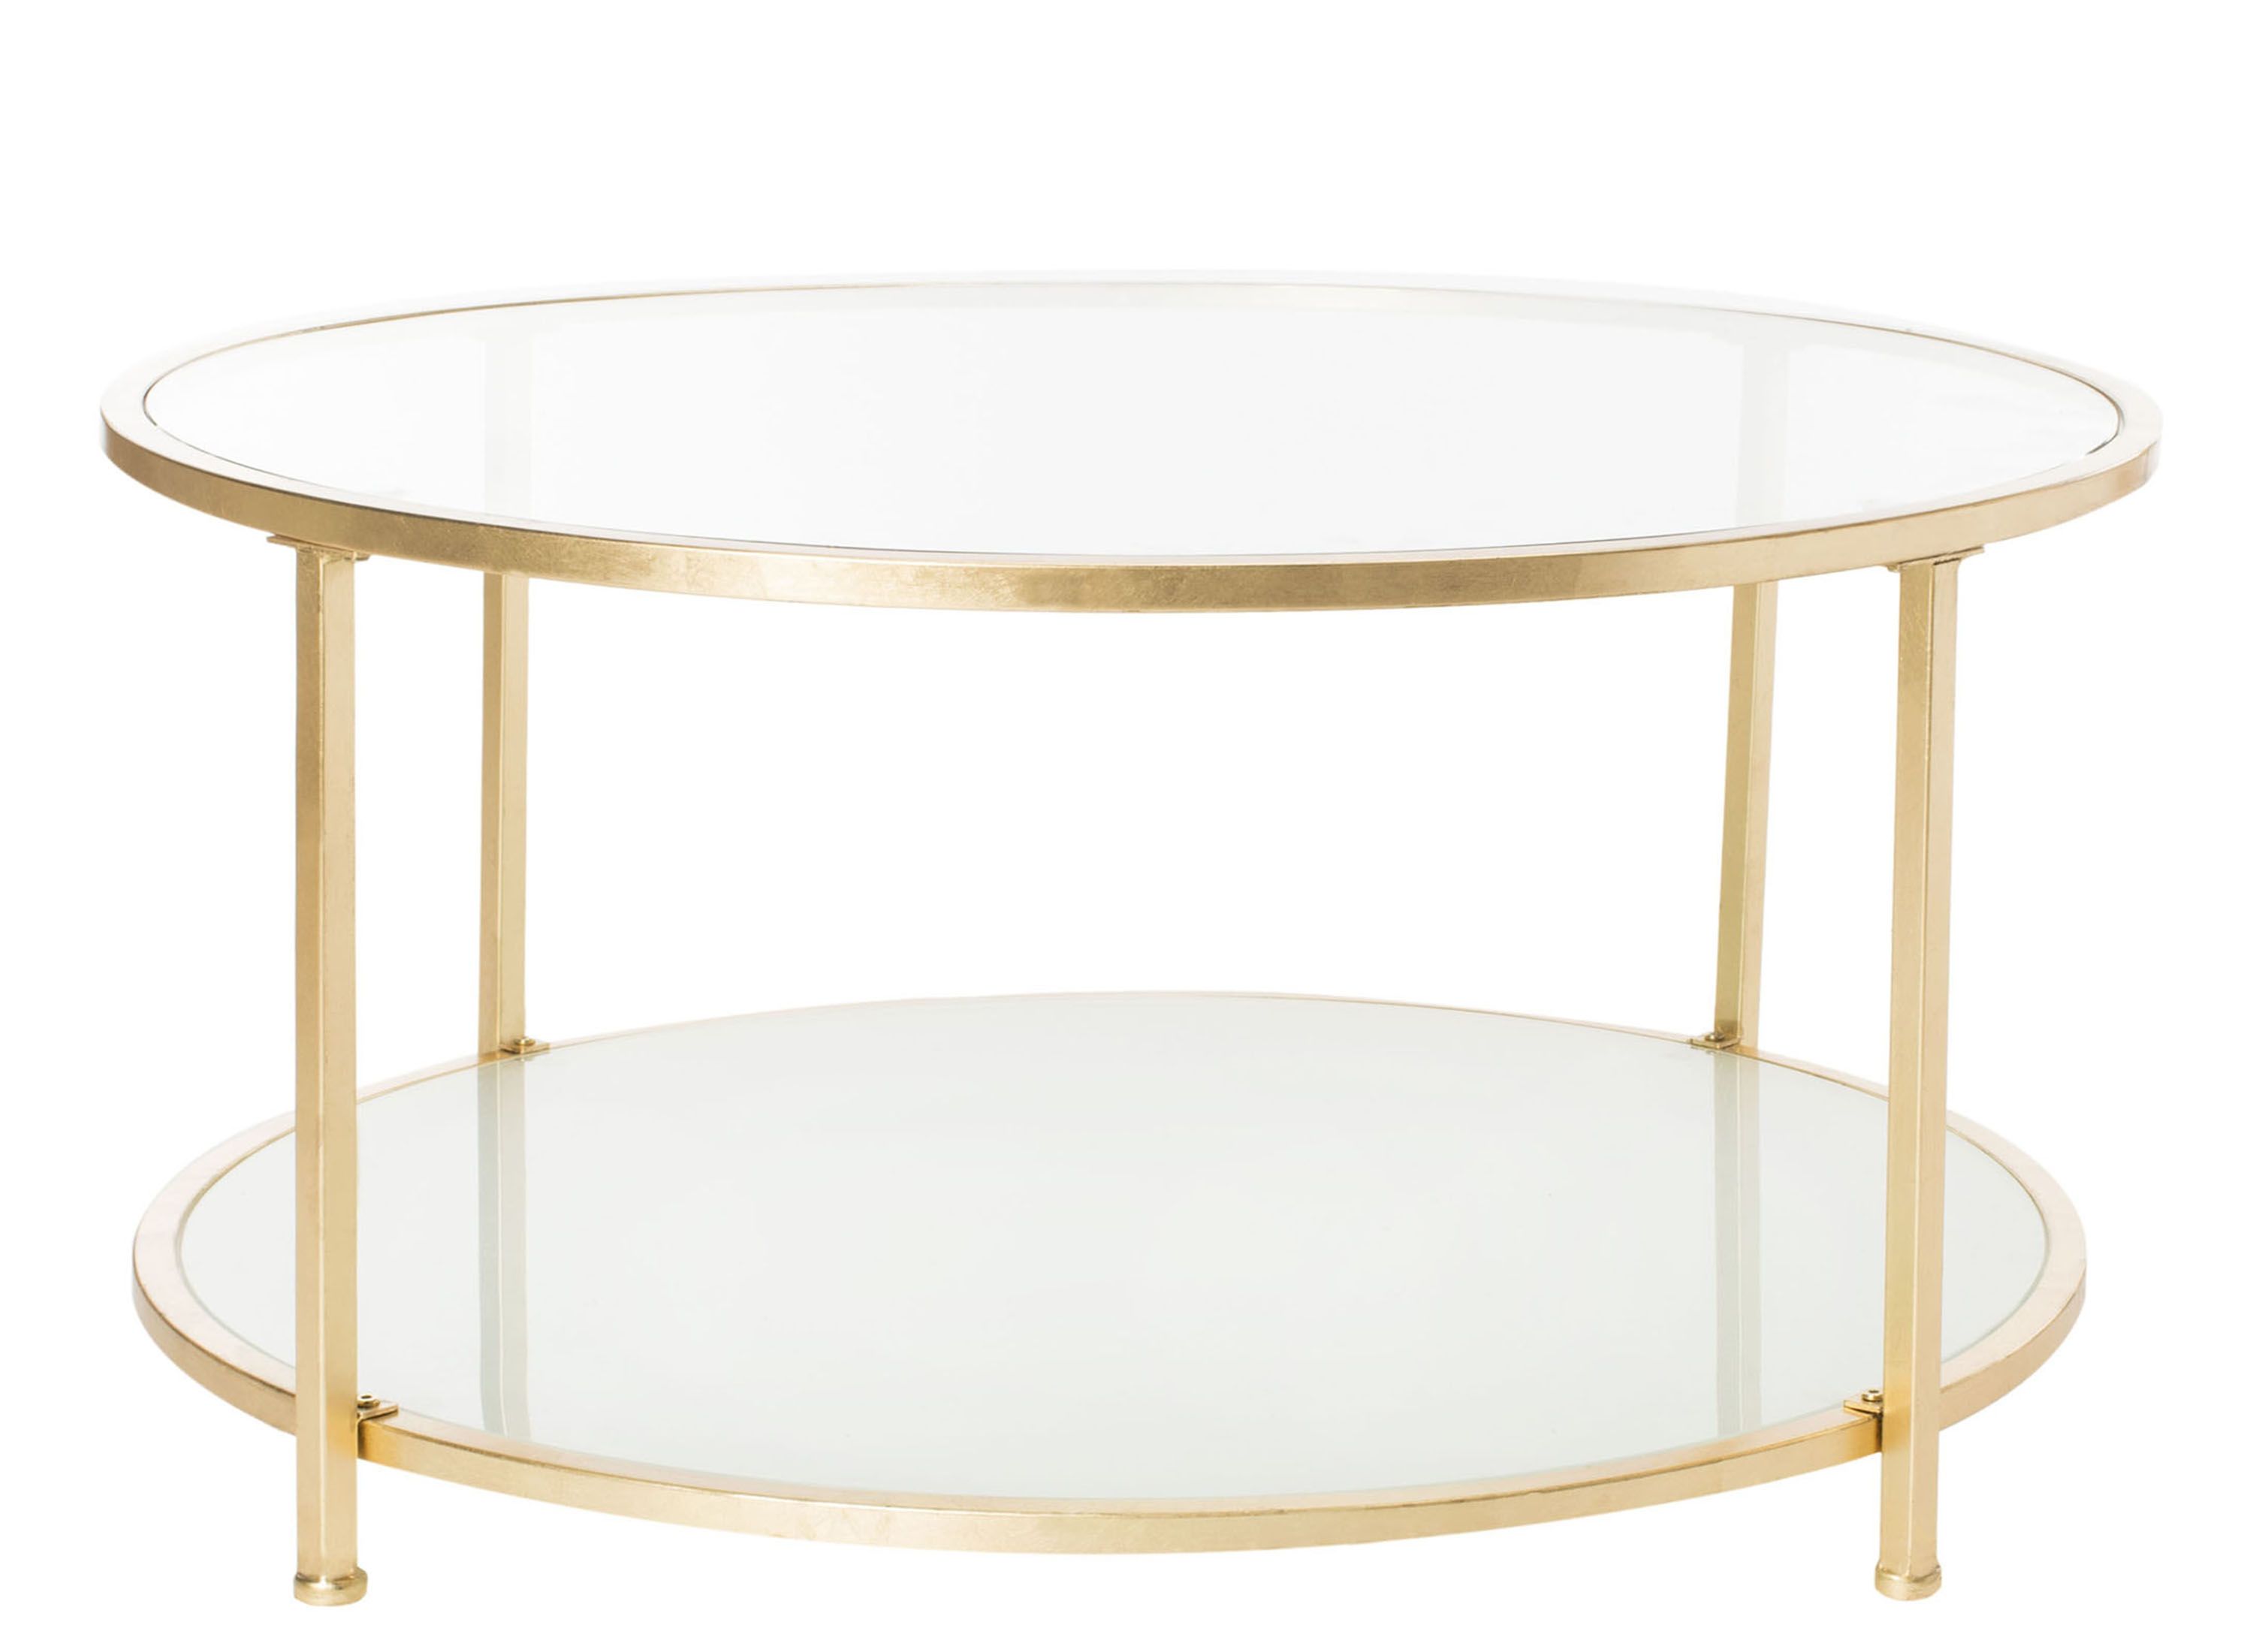 Patience 2 Tier Round Coffee Table | Raymour & Flanigan